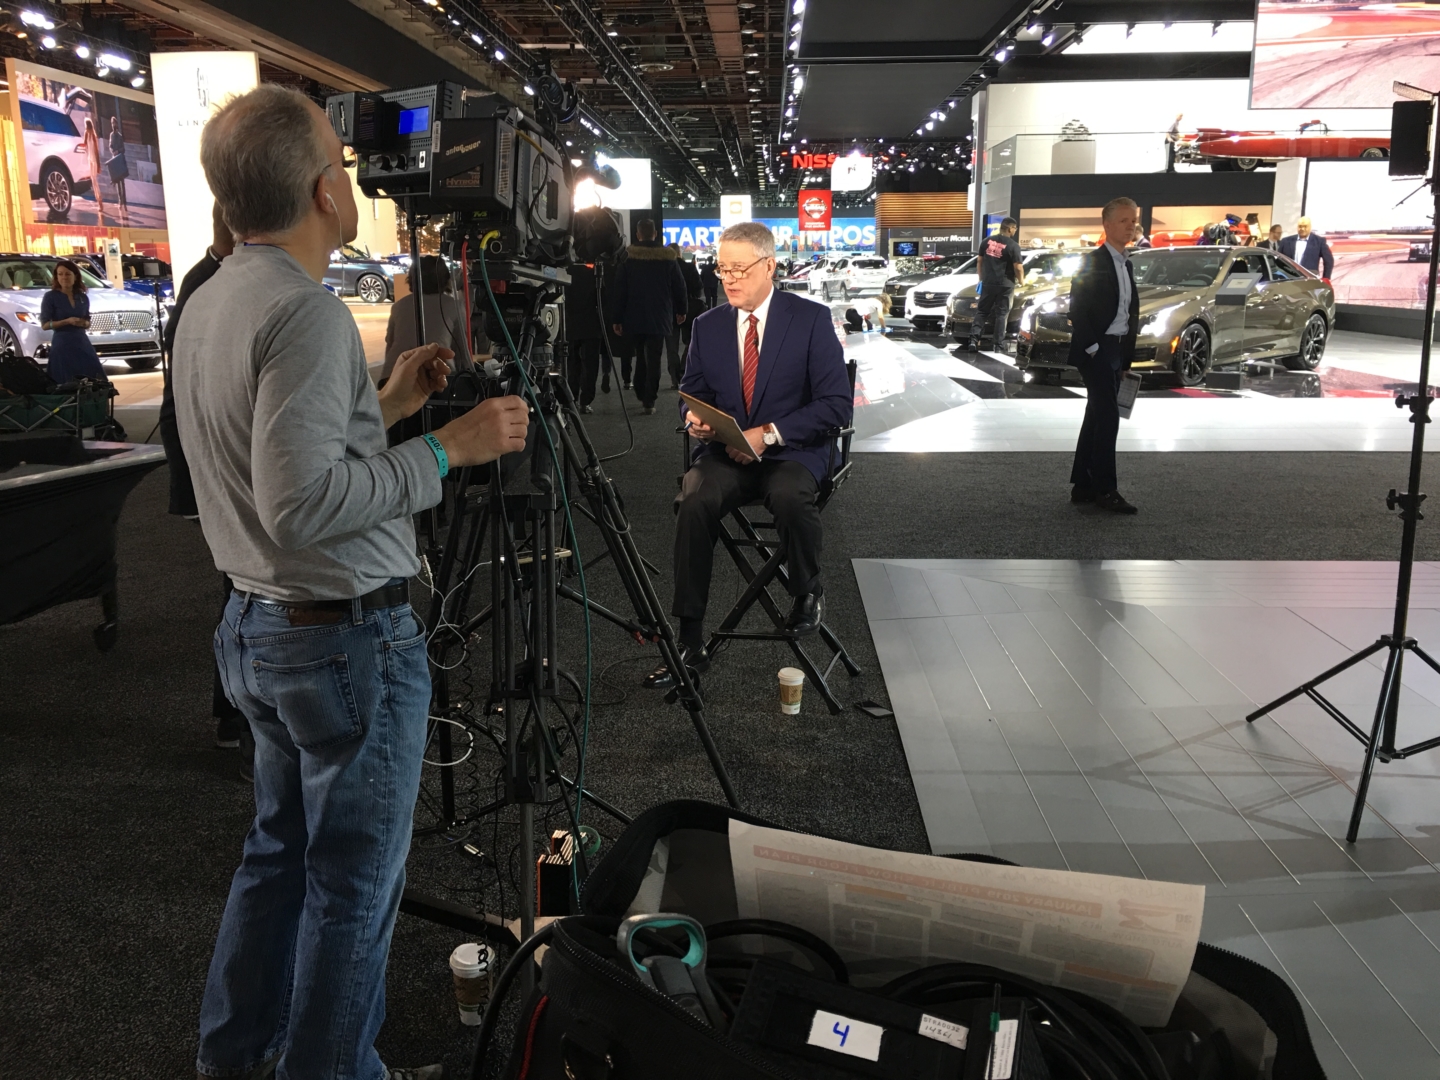 A man is speaking in front of a camera next to vehicles on display at the 2019 Detroit Auto Show